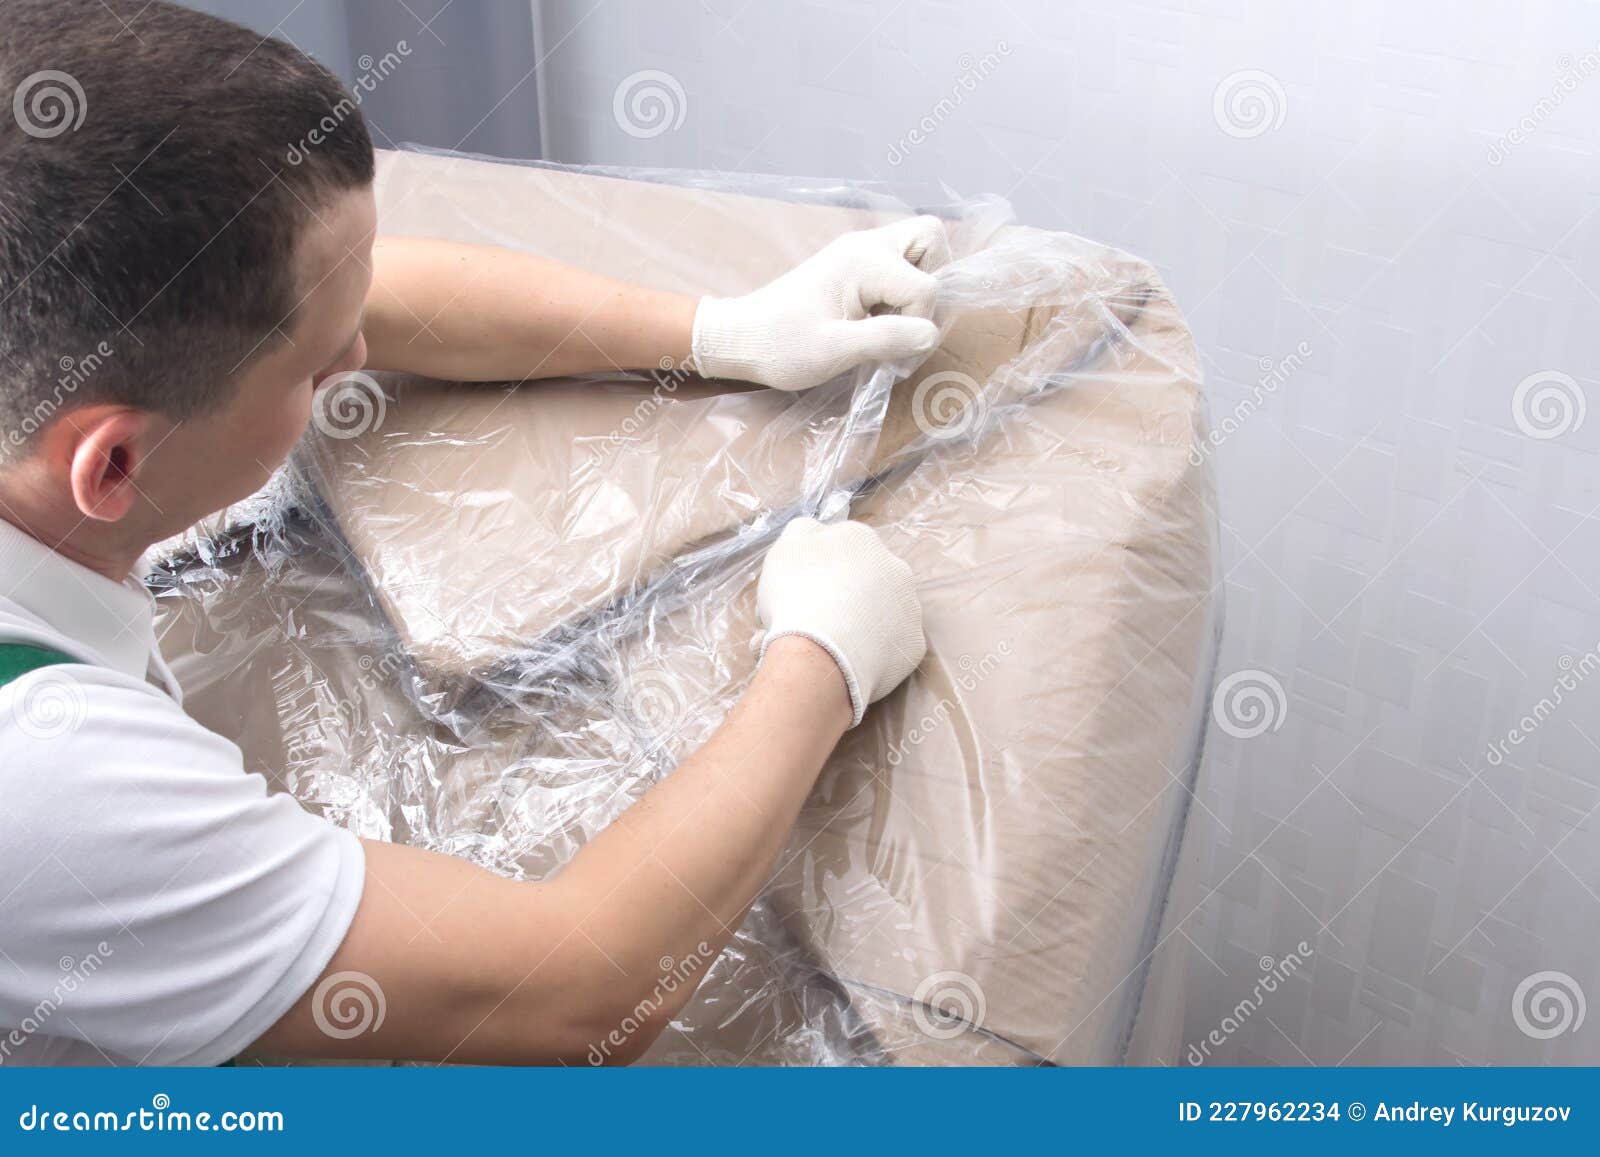 The Delivery Man in Protective Gloves, Opens the Furniture from